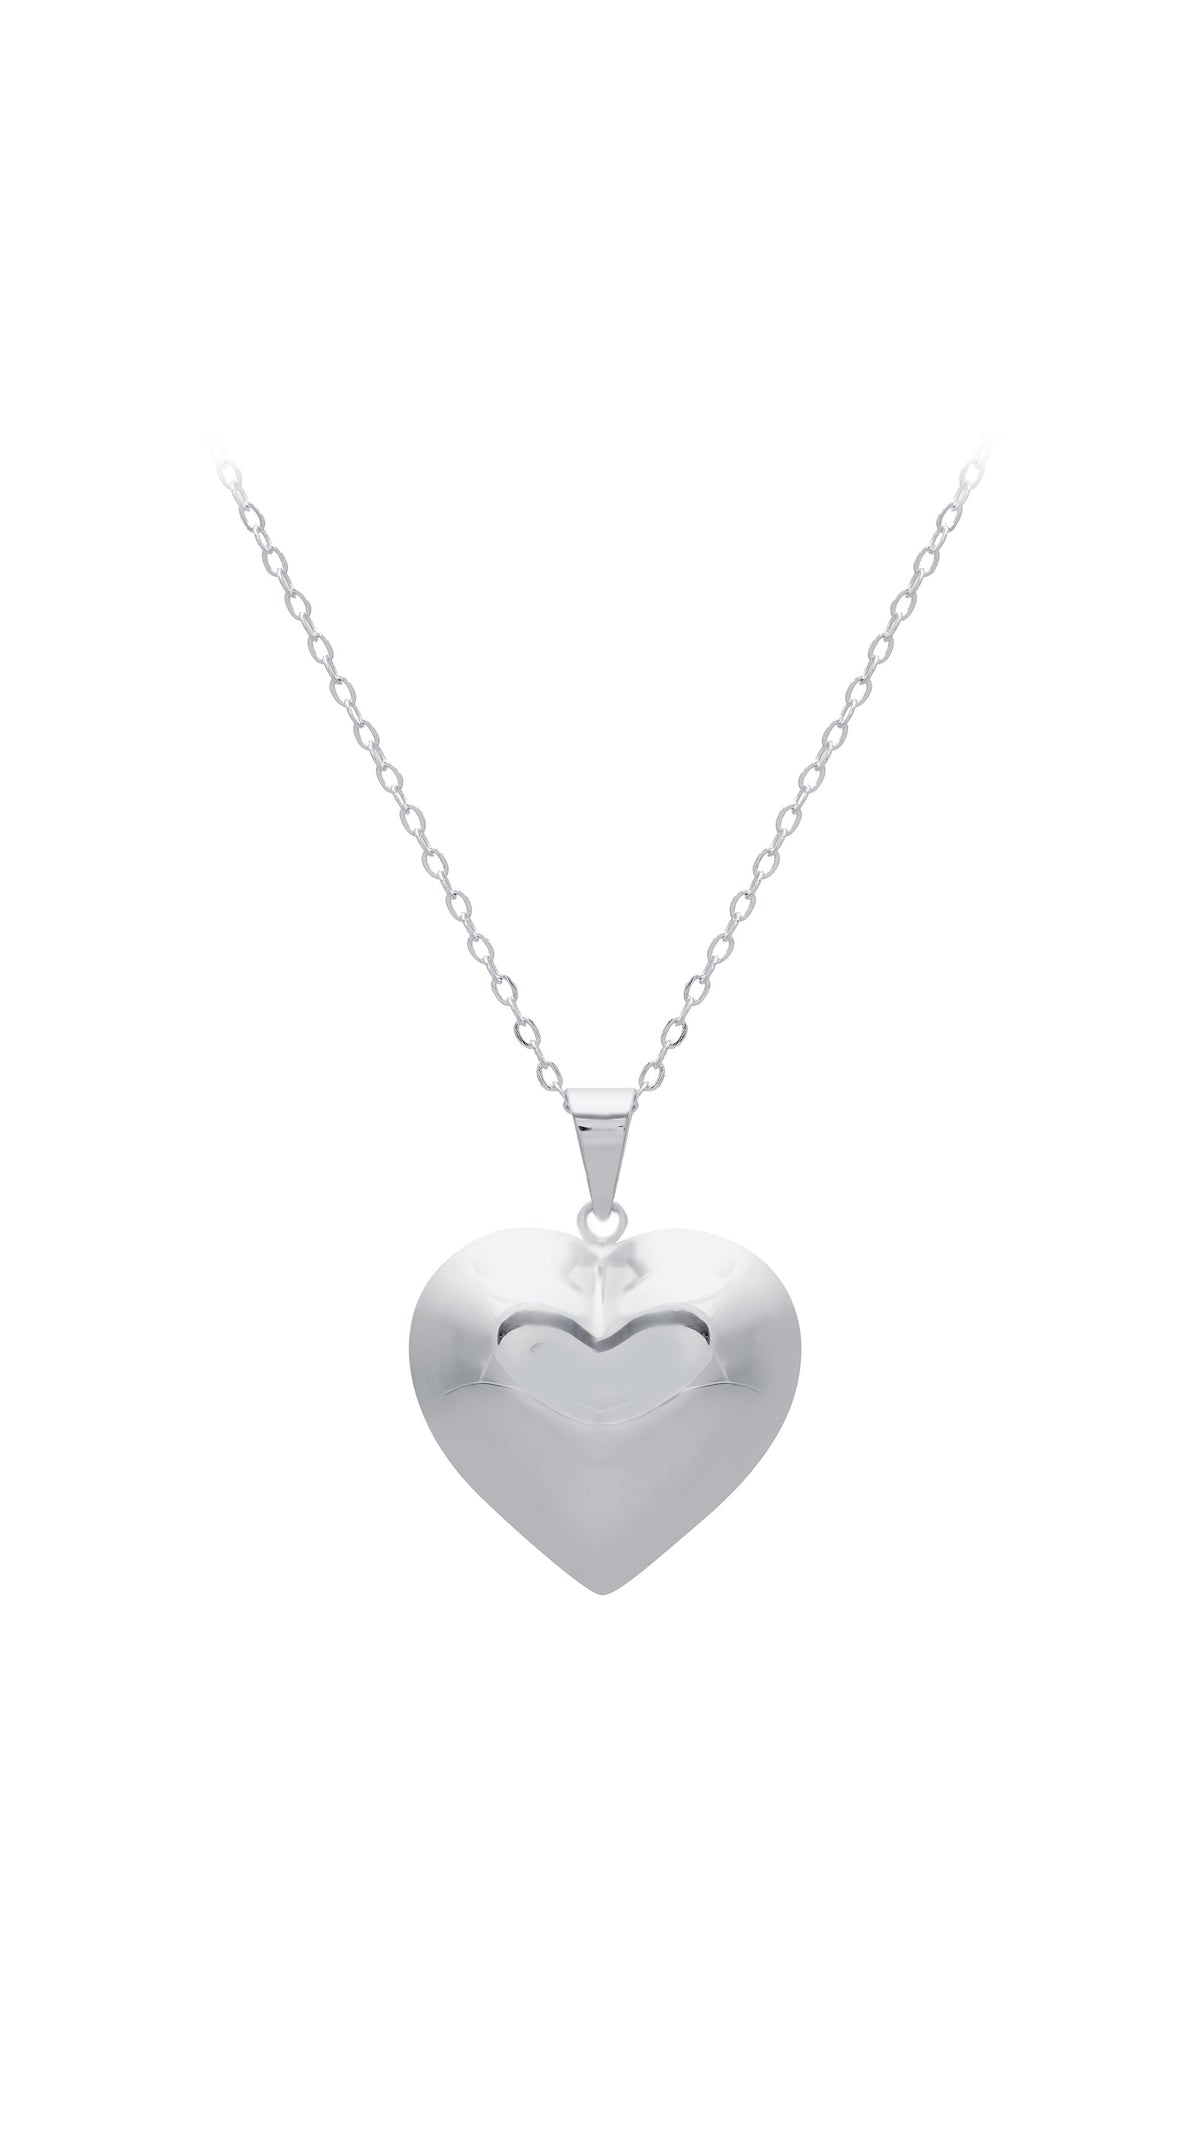 Sterling Silver Puff Heart Pendant available at LeGassick Diamonds and Jewellery Gold Coast, Australia.